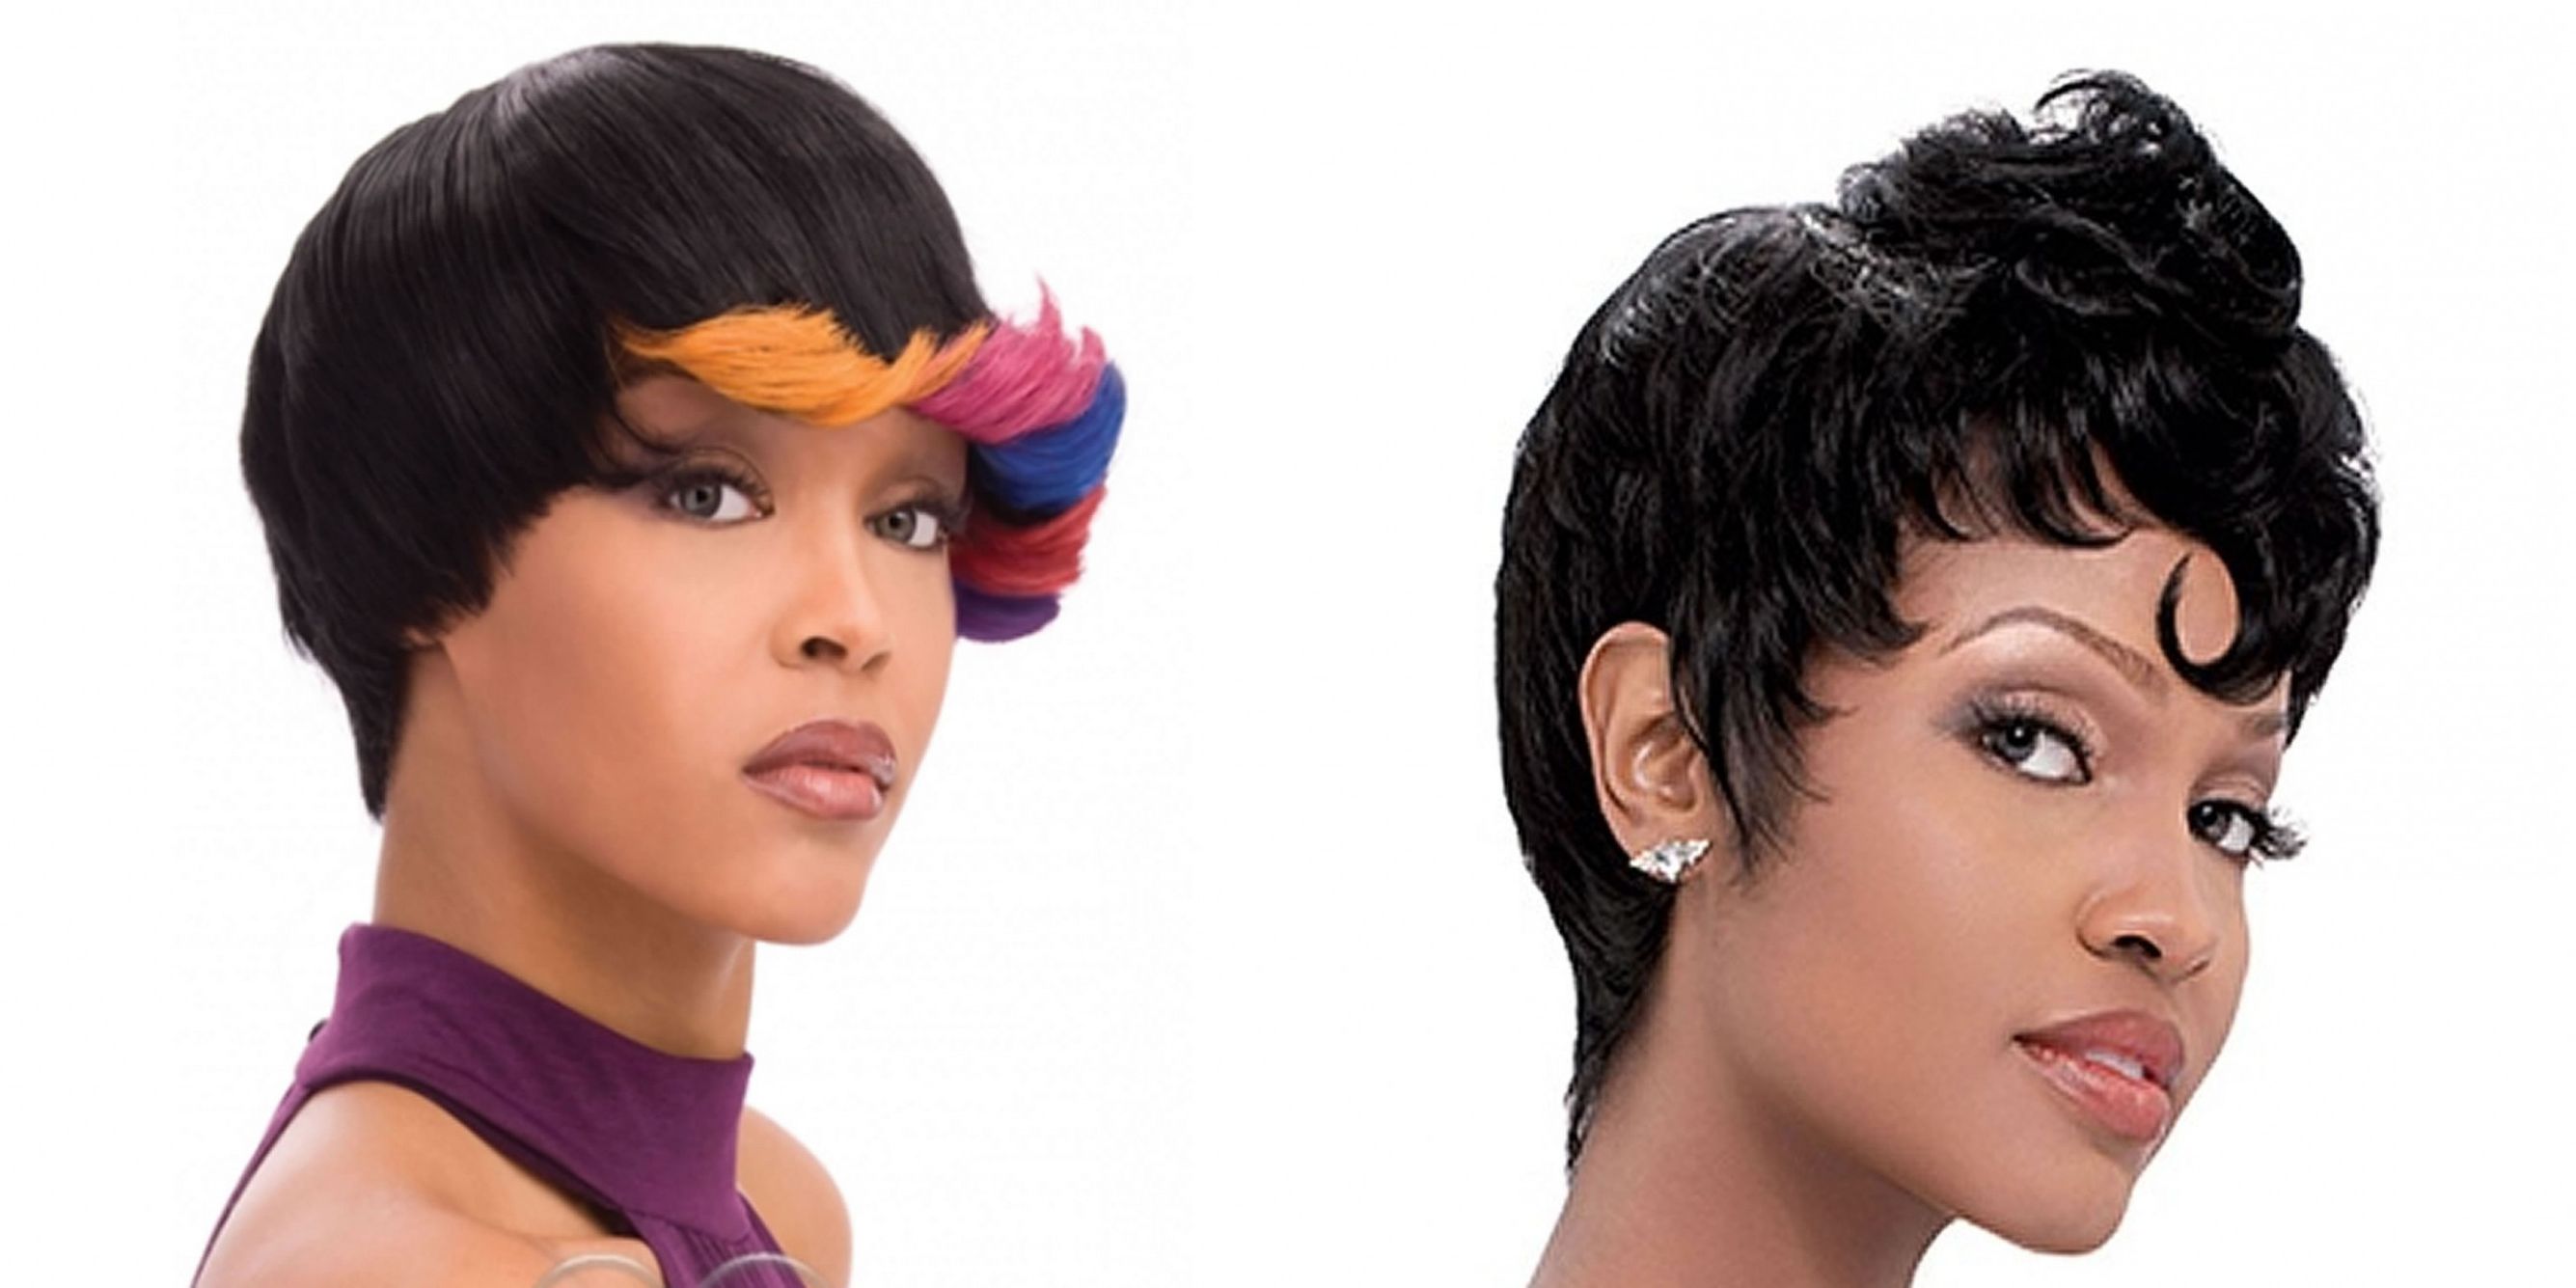 Pixie Hairstyles For Black Women – 60 Cool Short Haircuts For 2017 With Black Women With Short Hairstyles (View 7 of 25)